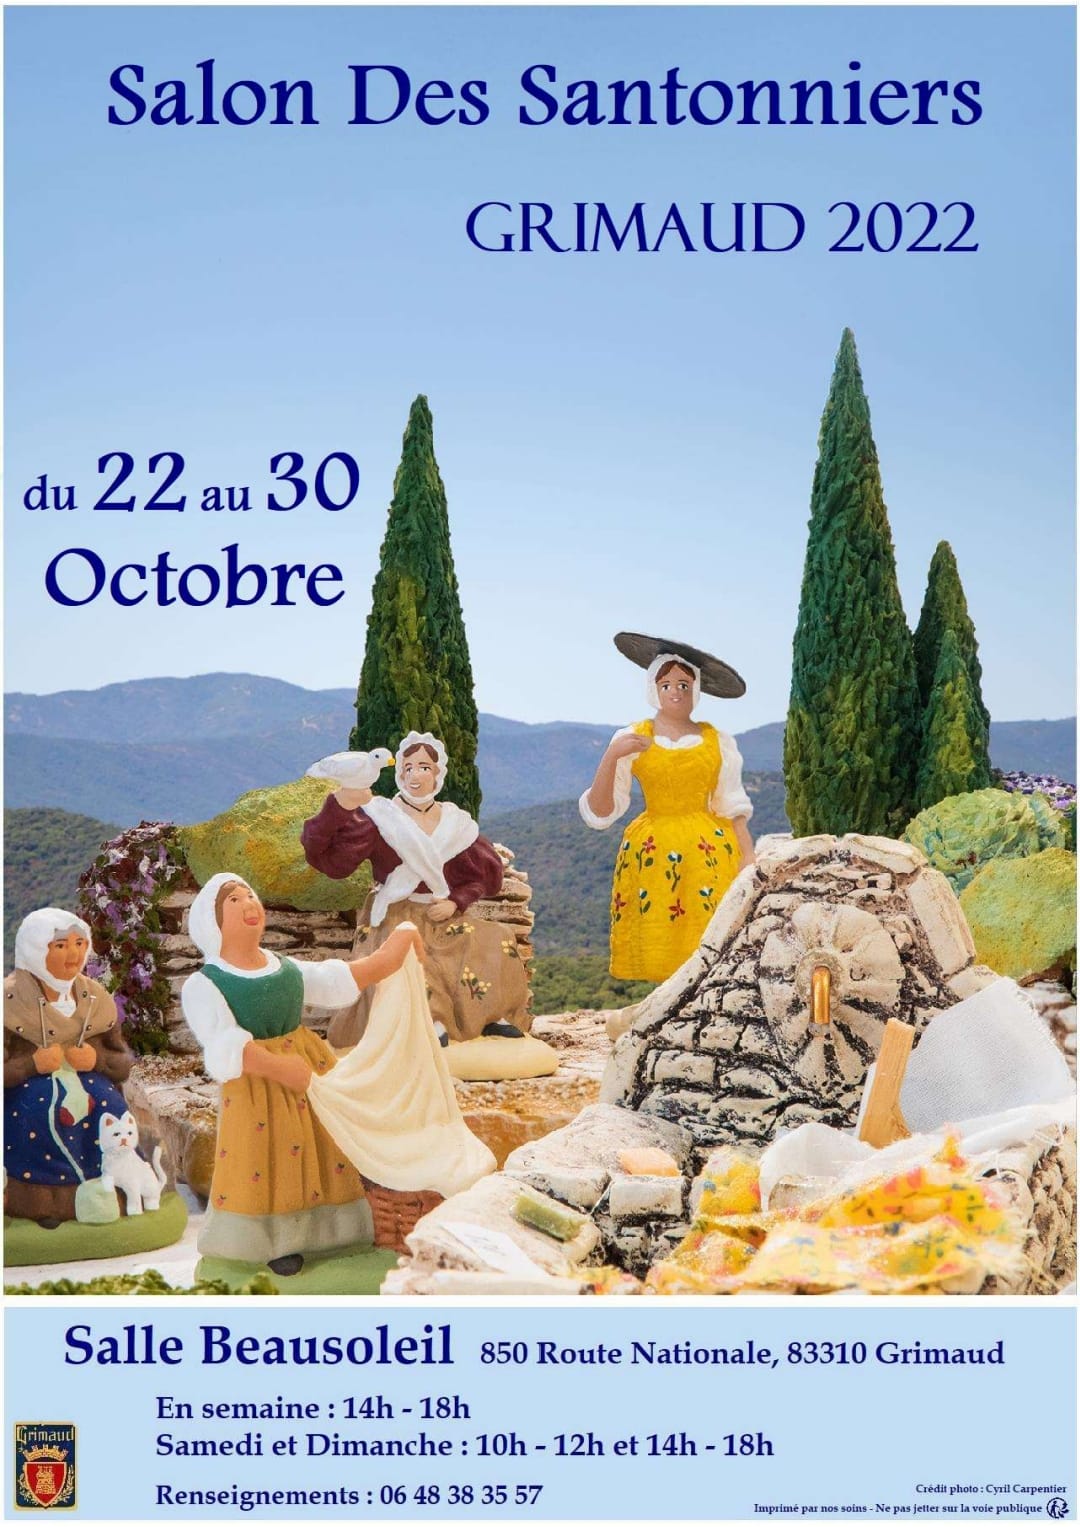 From October 22 to 30: 3rd Grimaud santon-makers fair